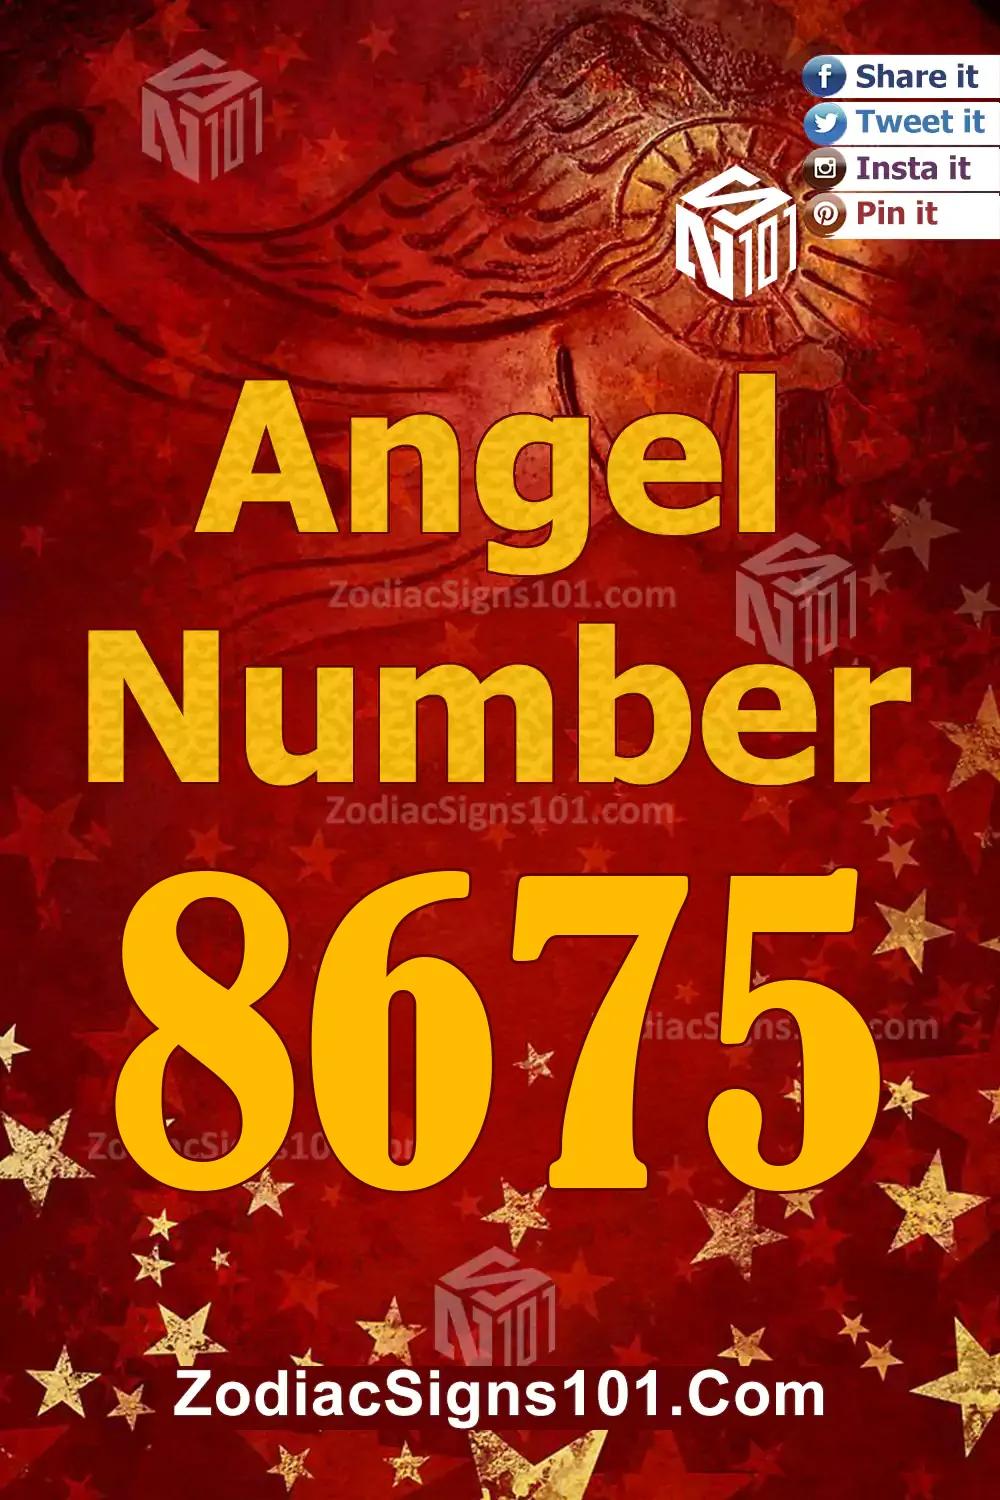 8675 Angel Number Meaning